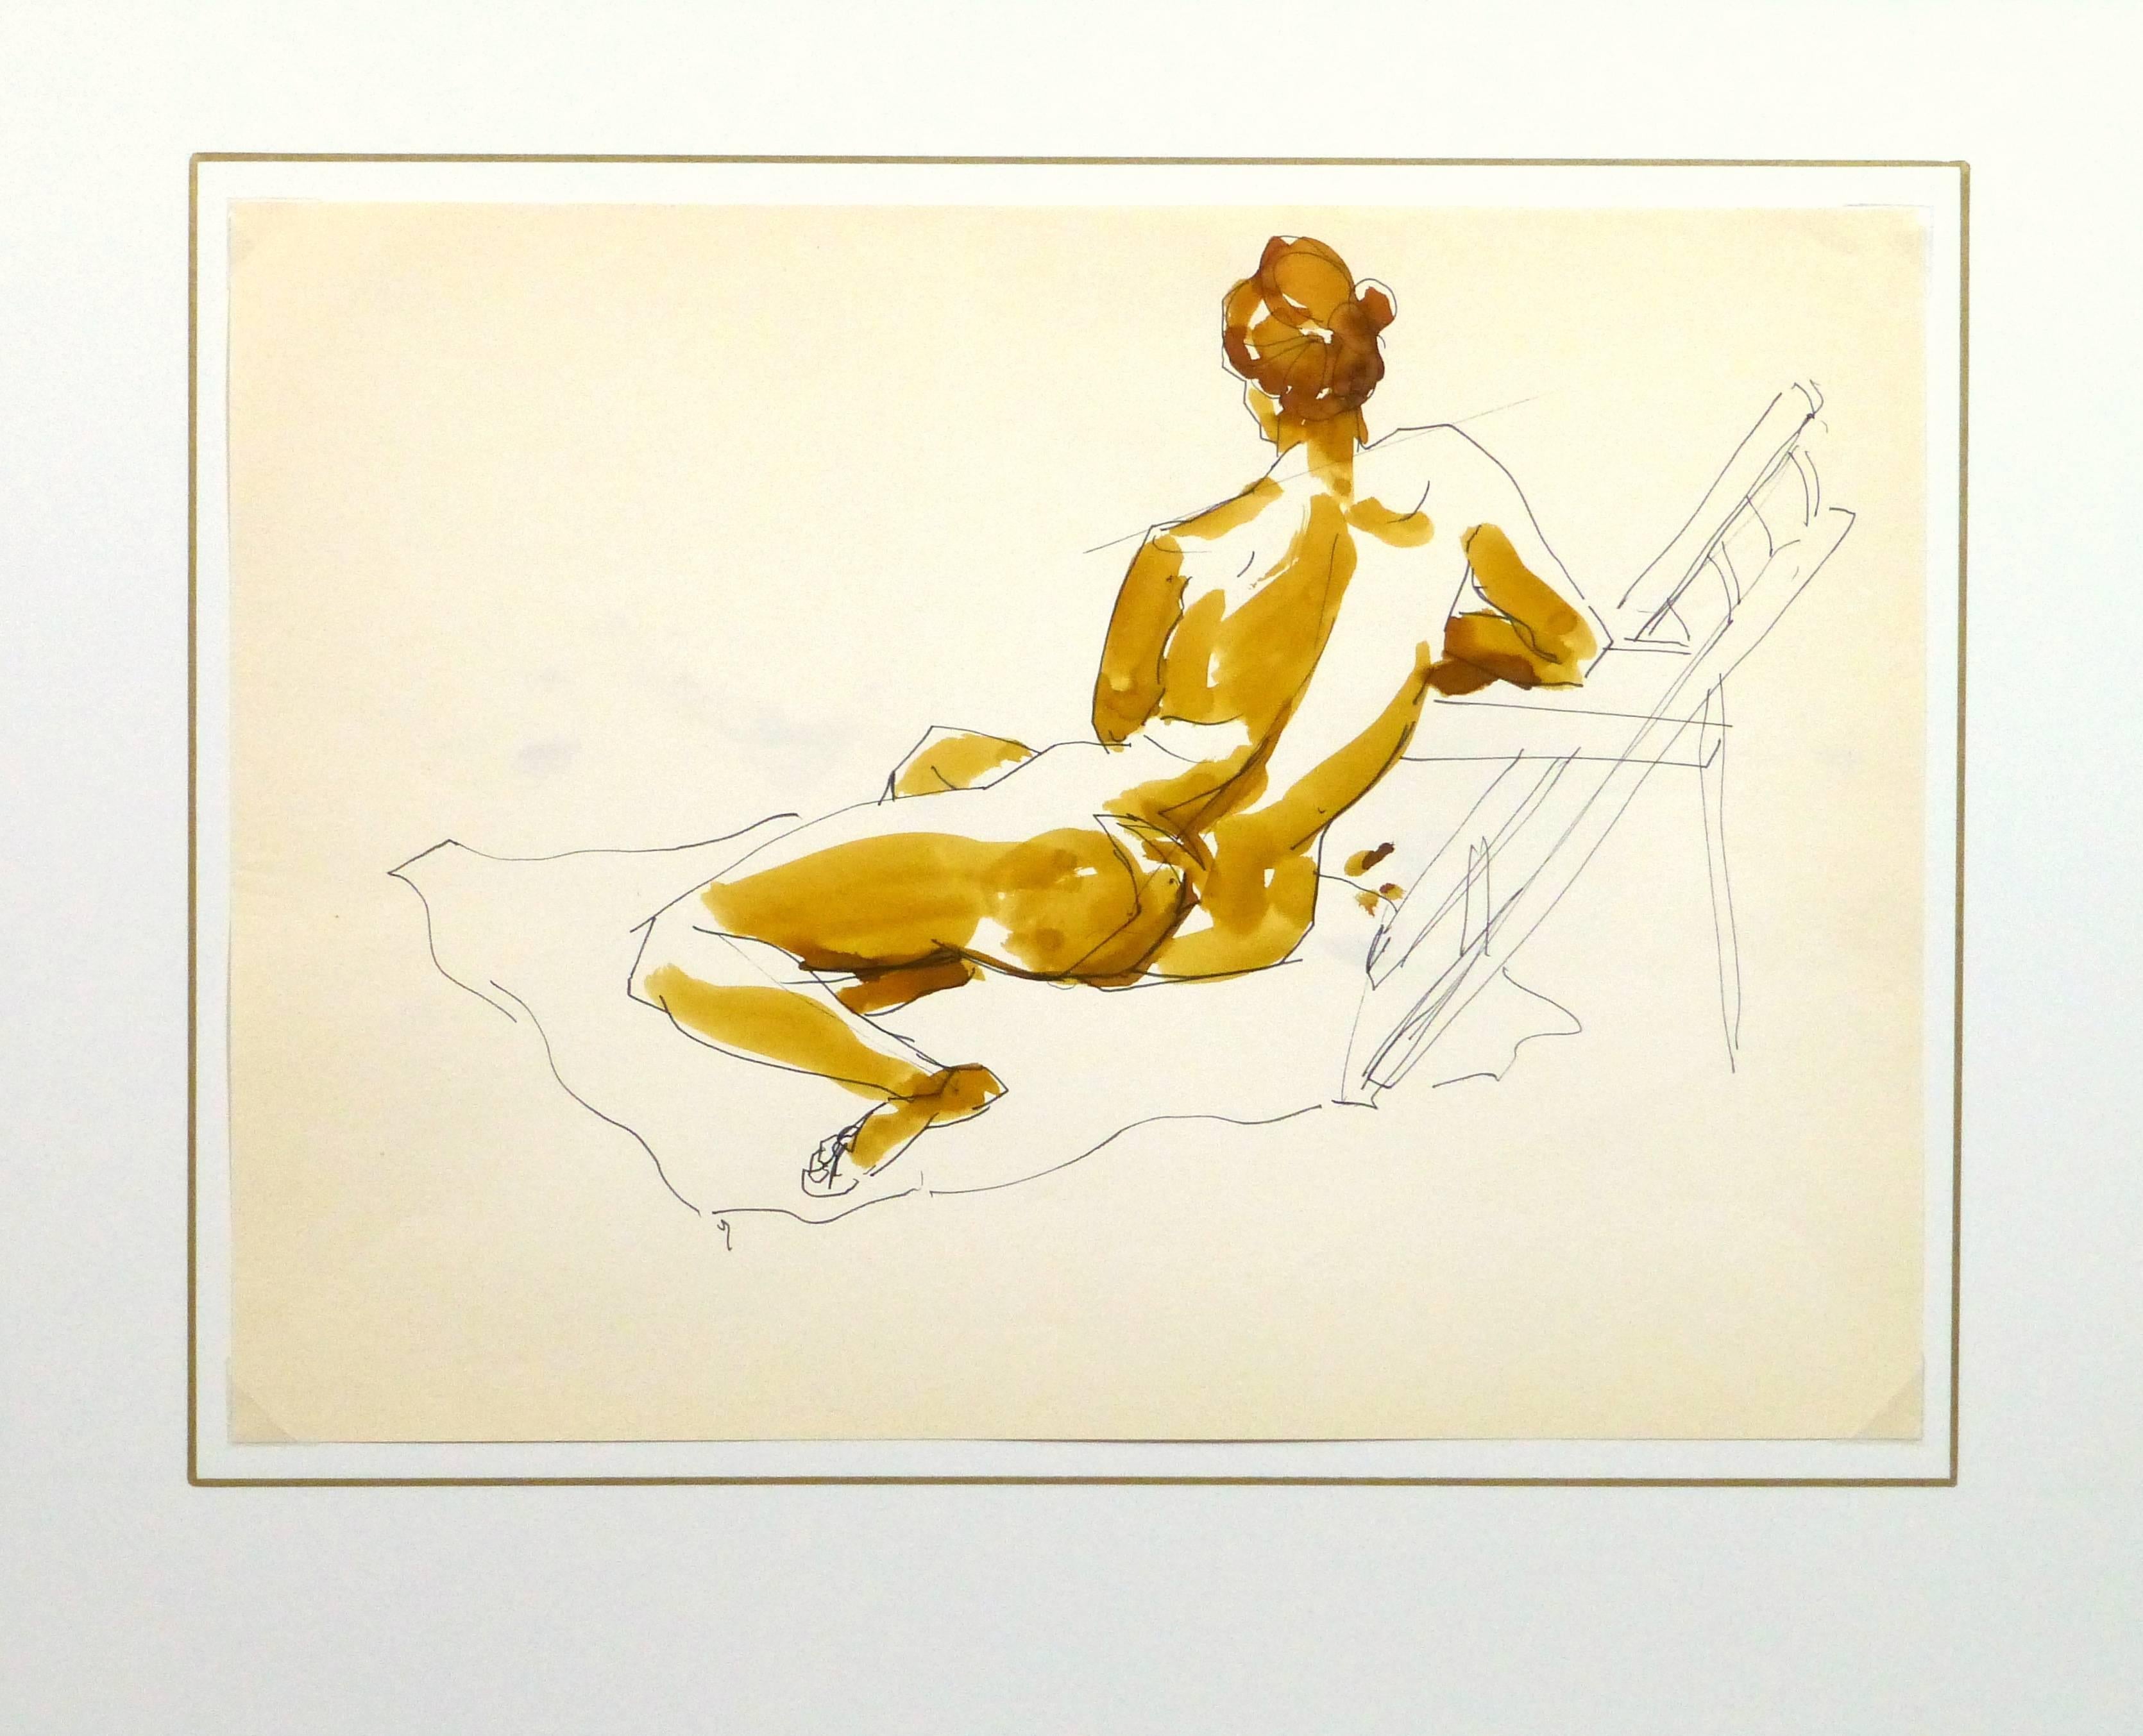 French watercolor and ink painting of a nude female figure reclining alongside a folding chair in earthy hues of brown.

Original artwork on paper displayed on a white mat with a gold border. Archival plastic sleeve and Certificate of Authenticity